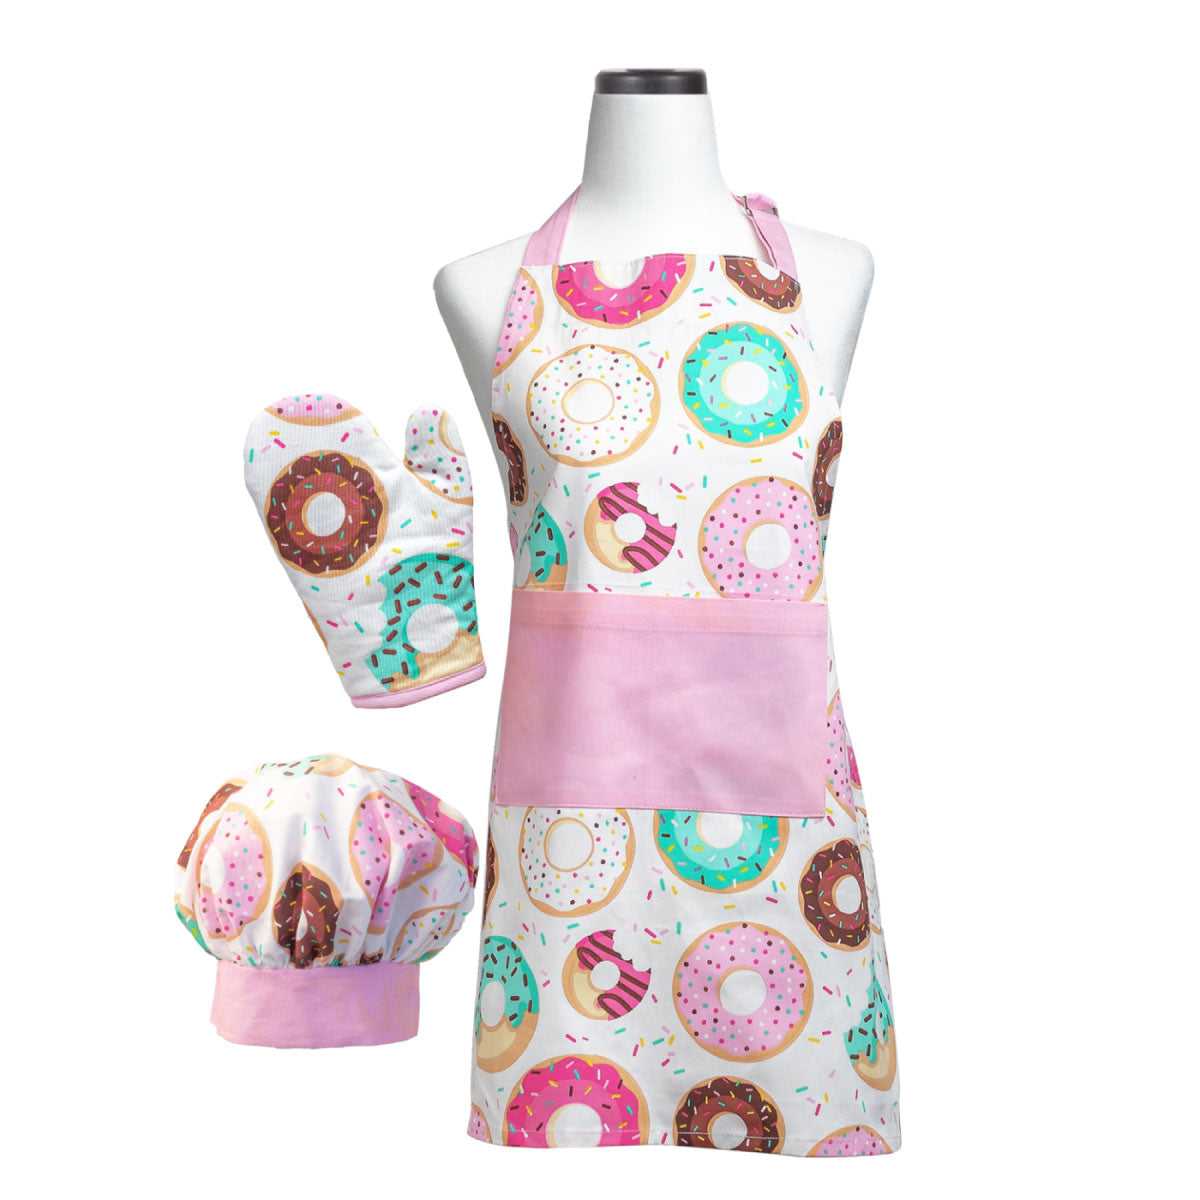 Donut Shoppe Deluxe Youth Apron Boxed Set from Handstand Kitchen